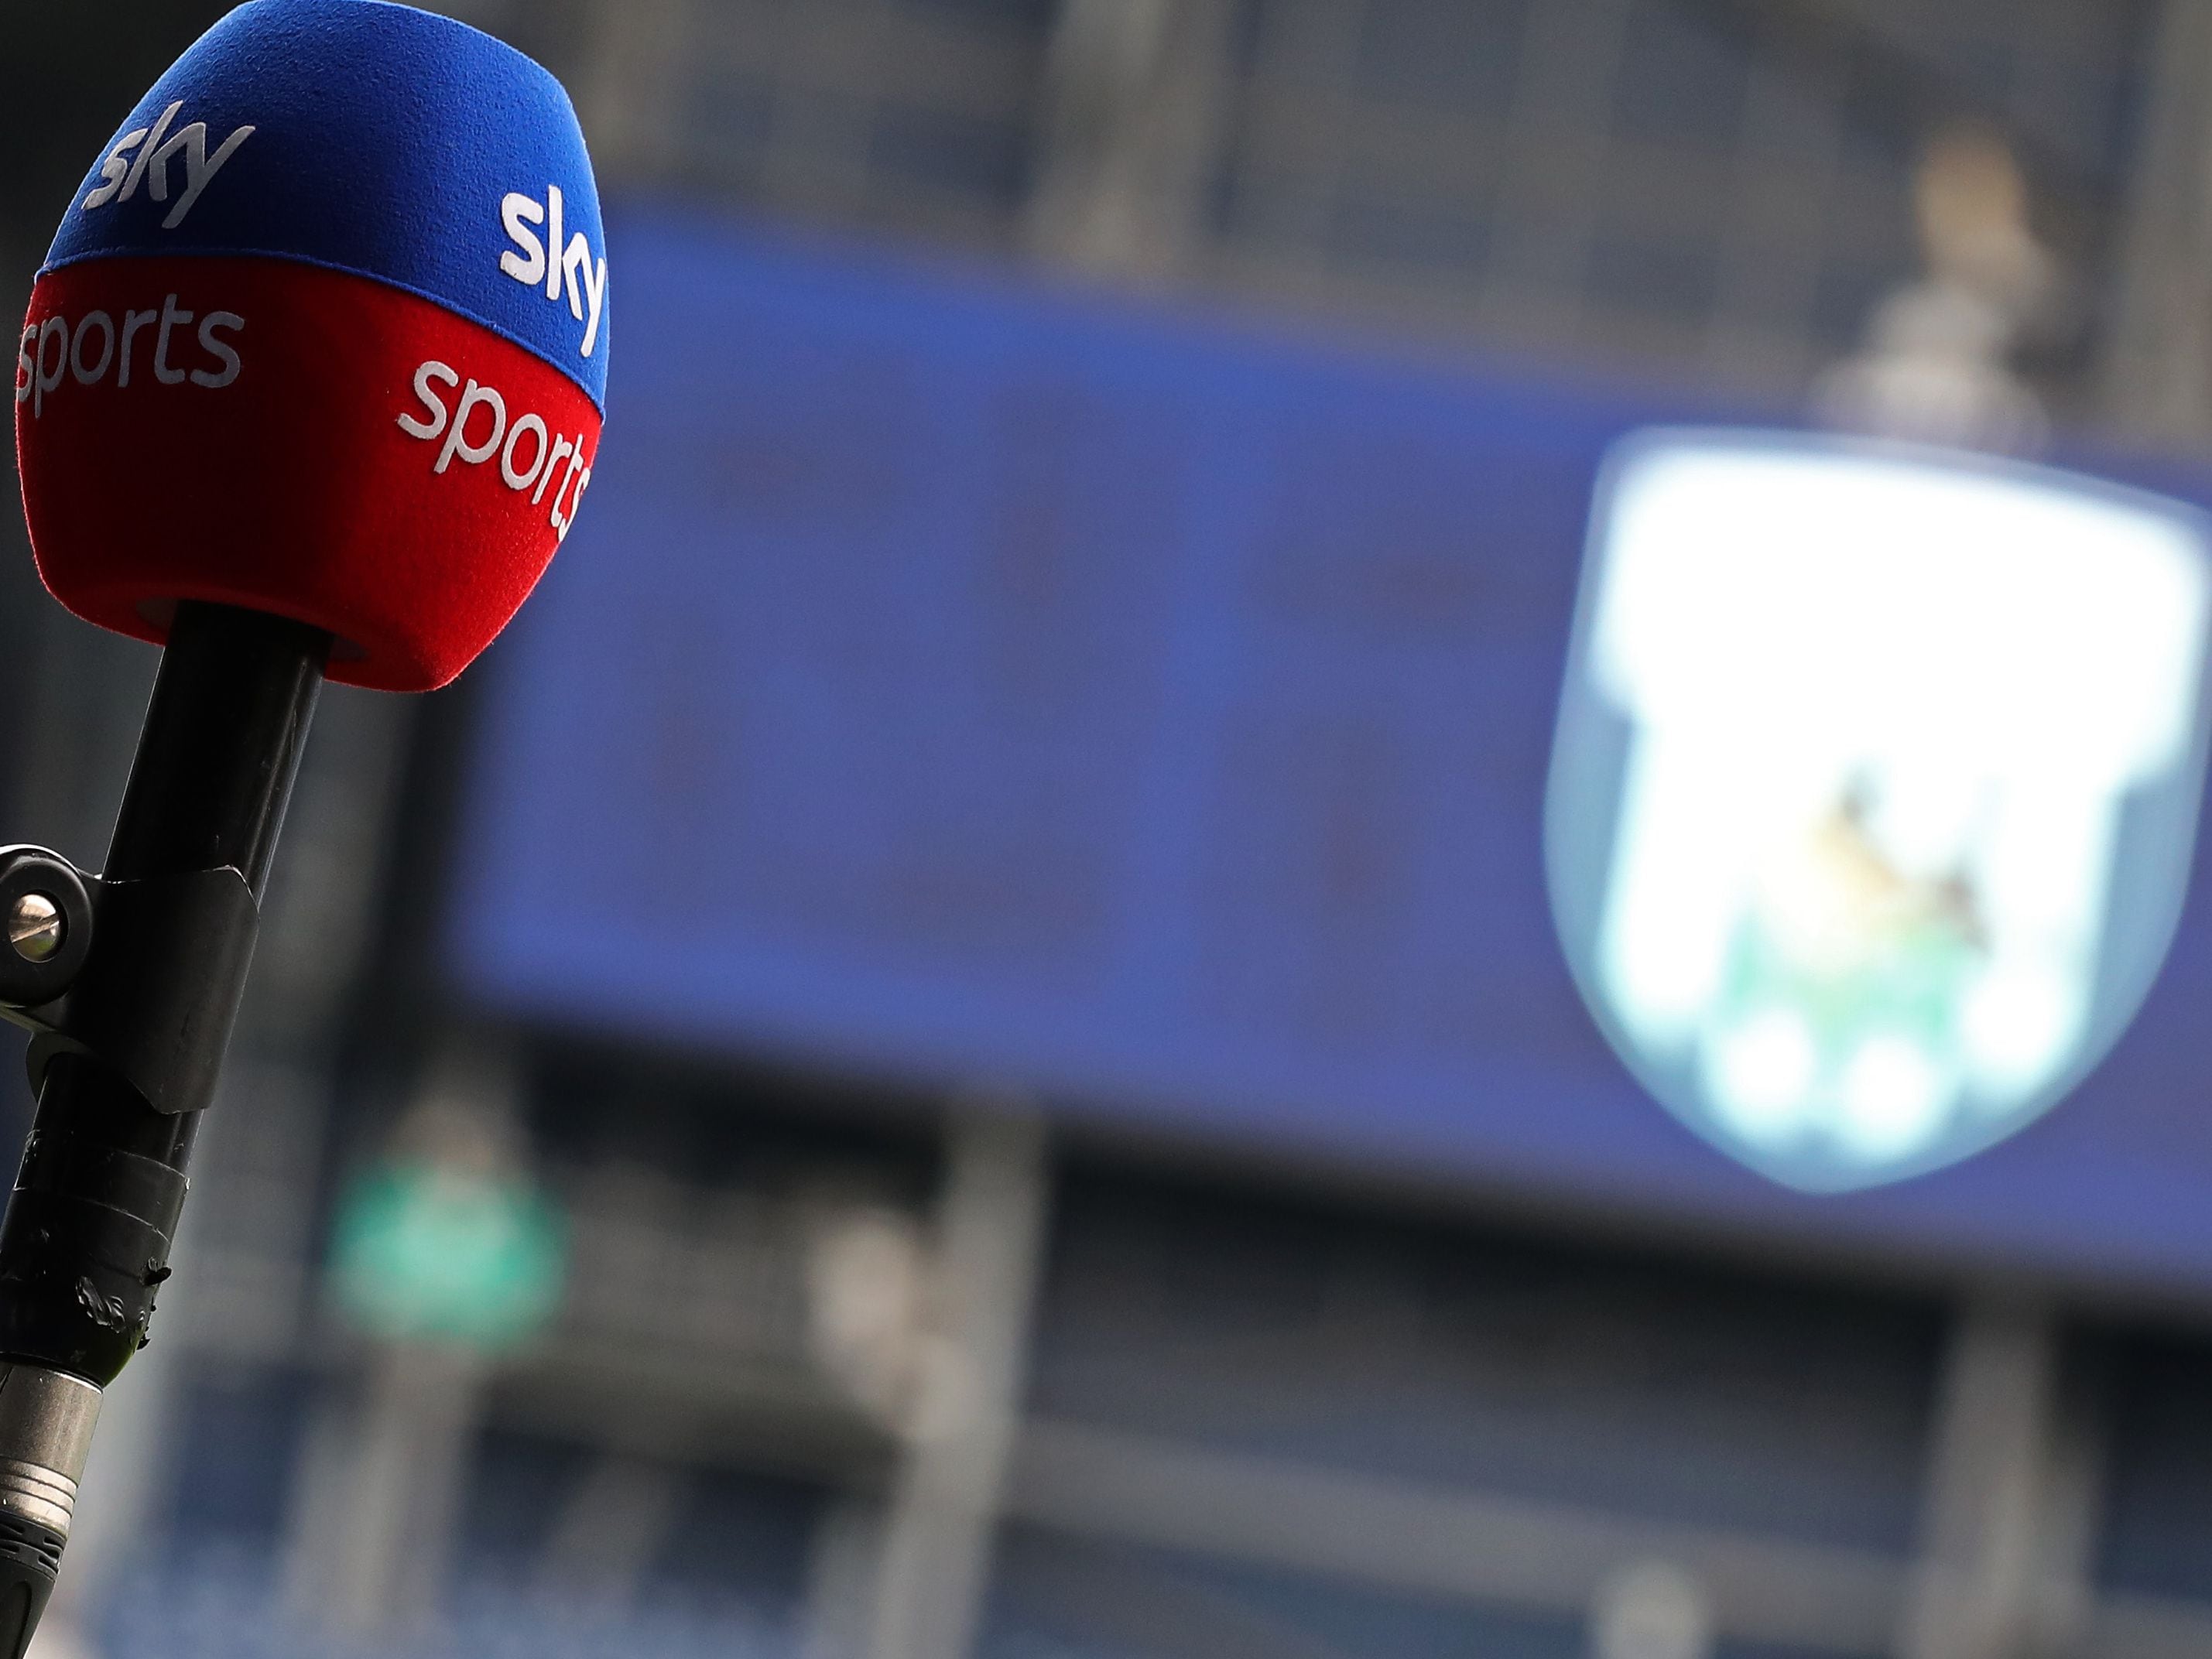 West Brom and Walsall see fixtures shifted for Sky TV as part of new deal